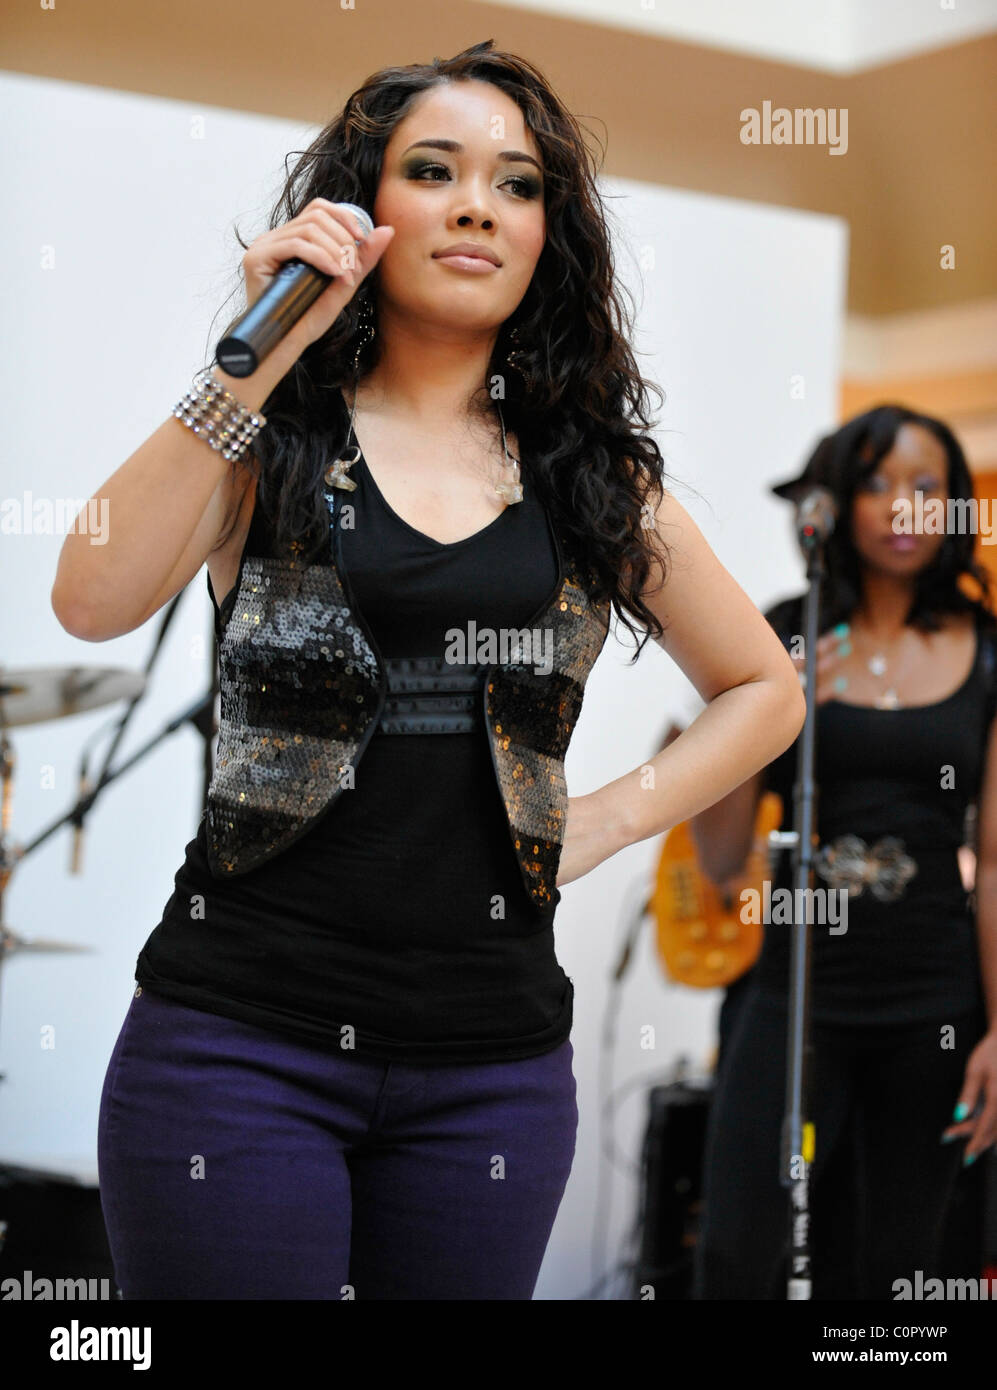 Canadian R&B Singer Kreesha Turner performs at the Grand Re-opening of  Fairview Mall Toronto Canada - 12.11.08 Stock Photo